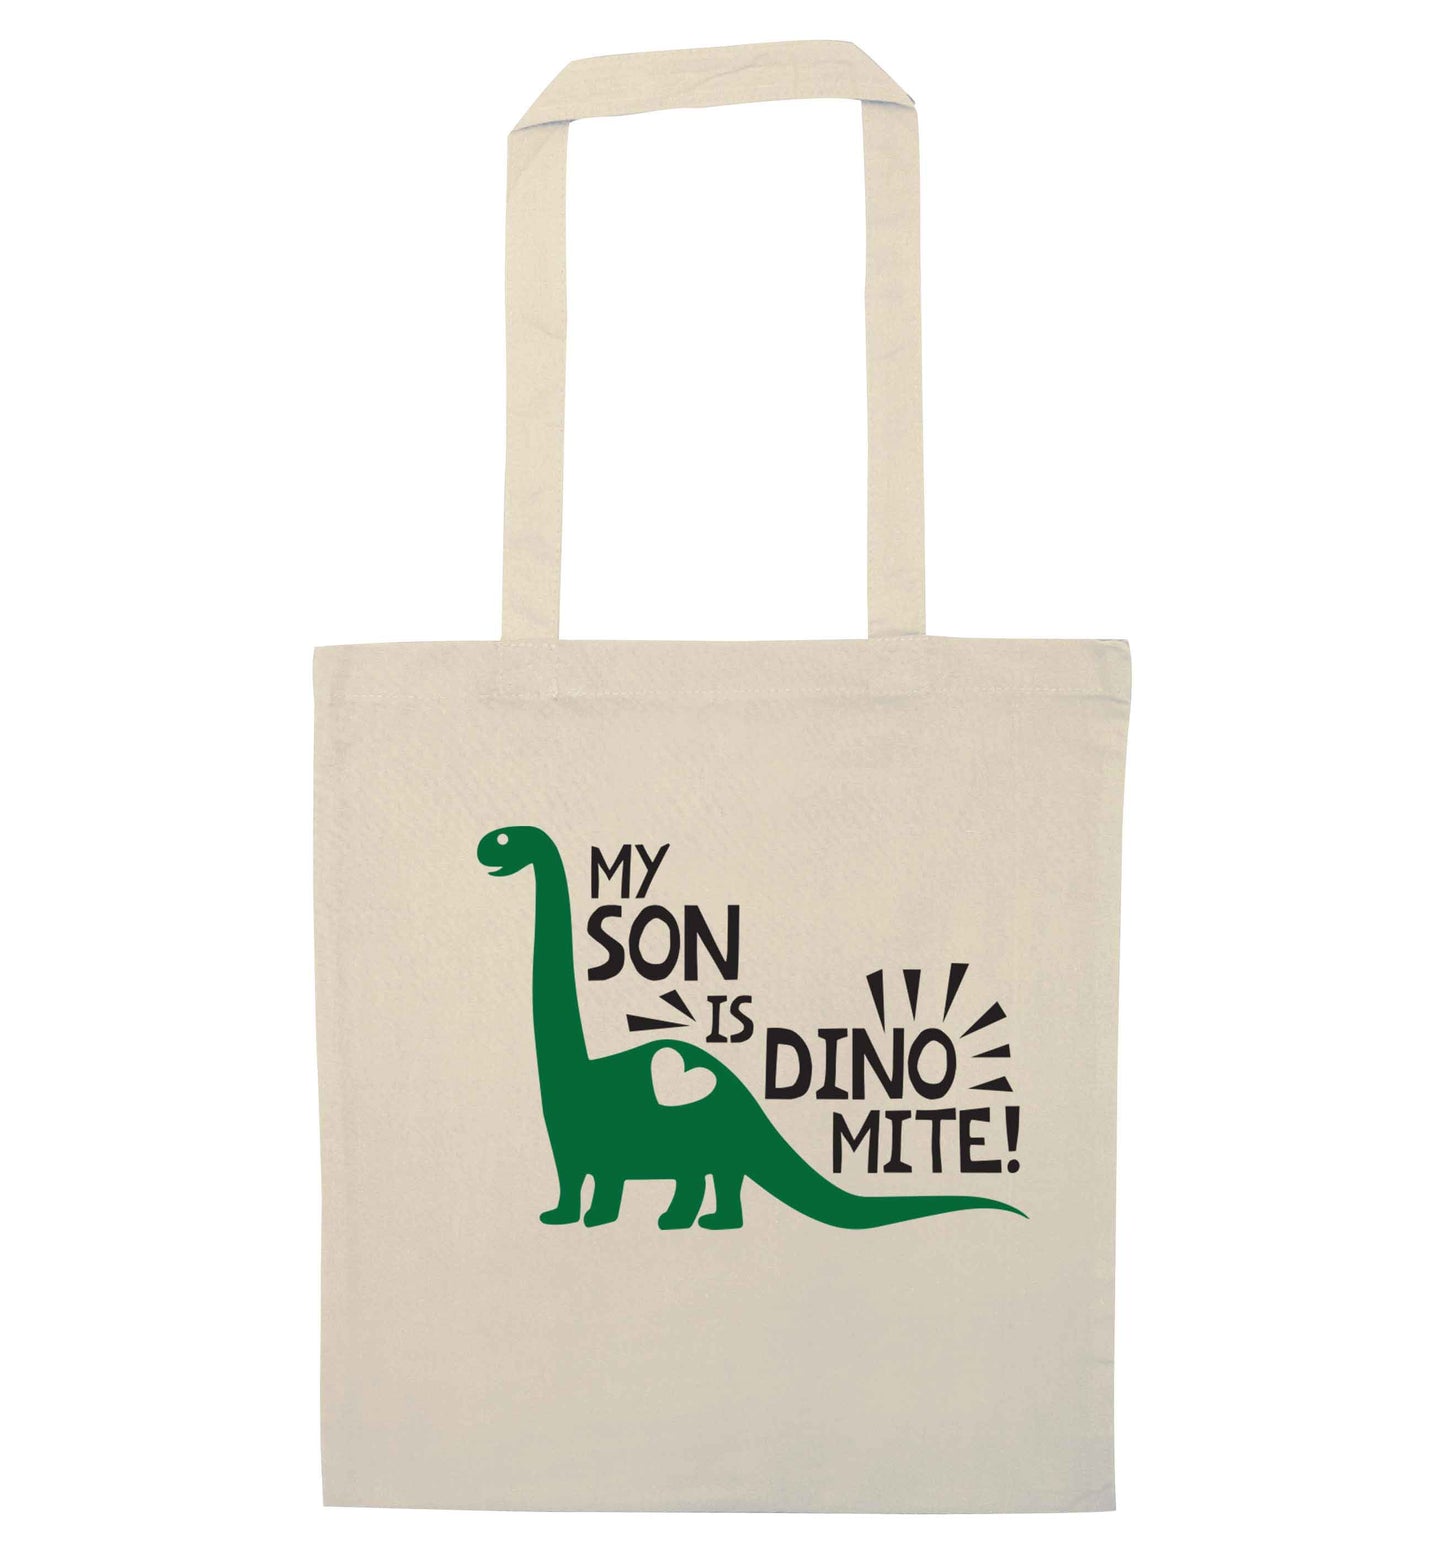 My son is dinomite! natural tote bag